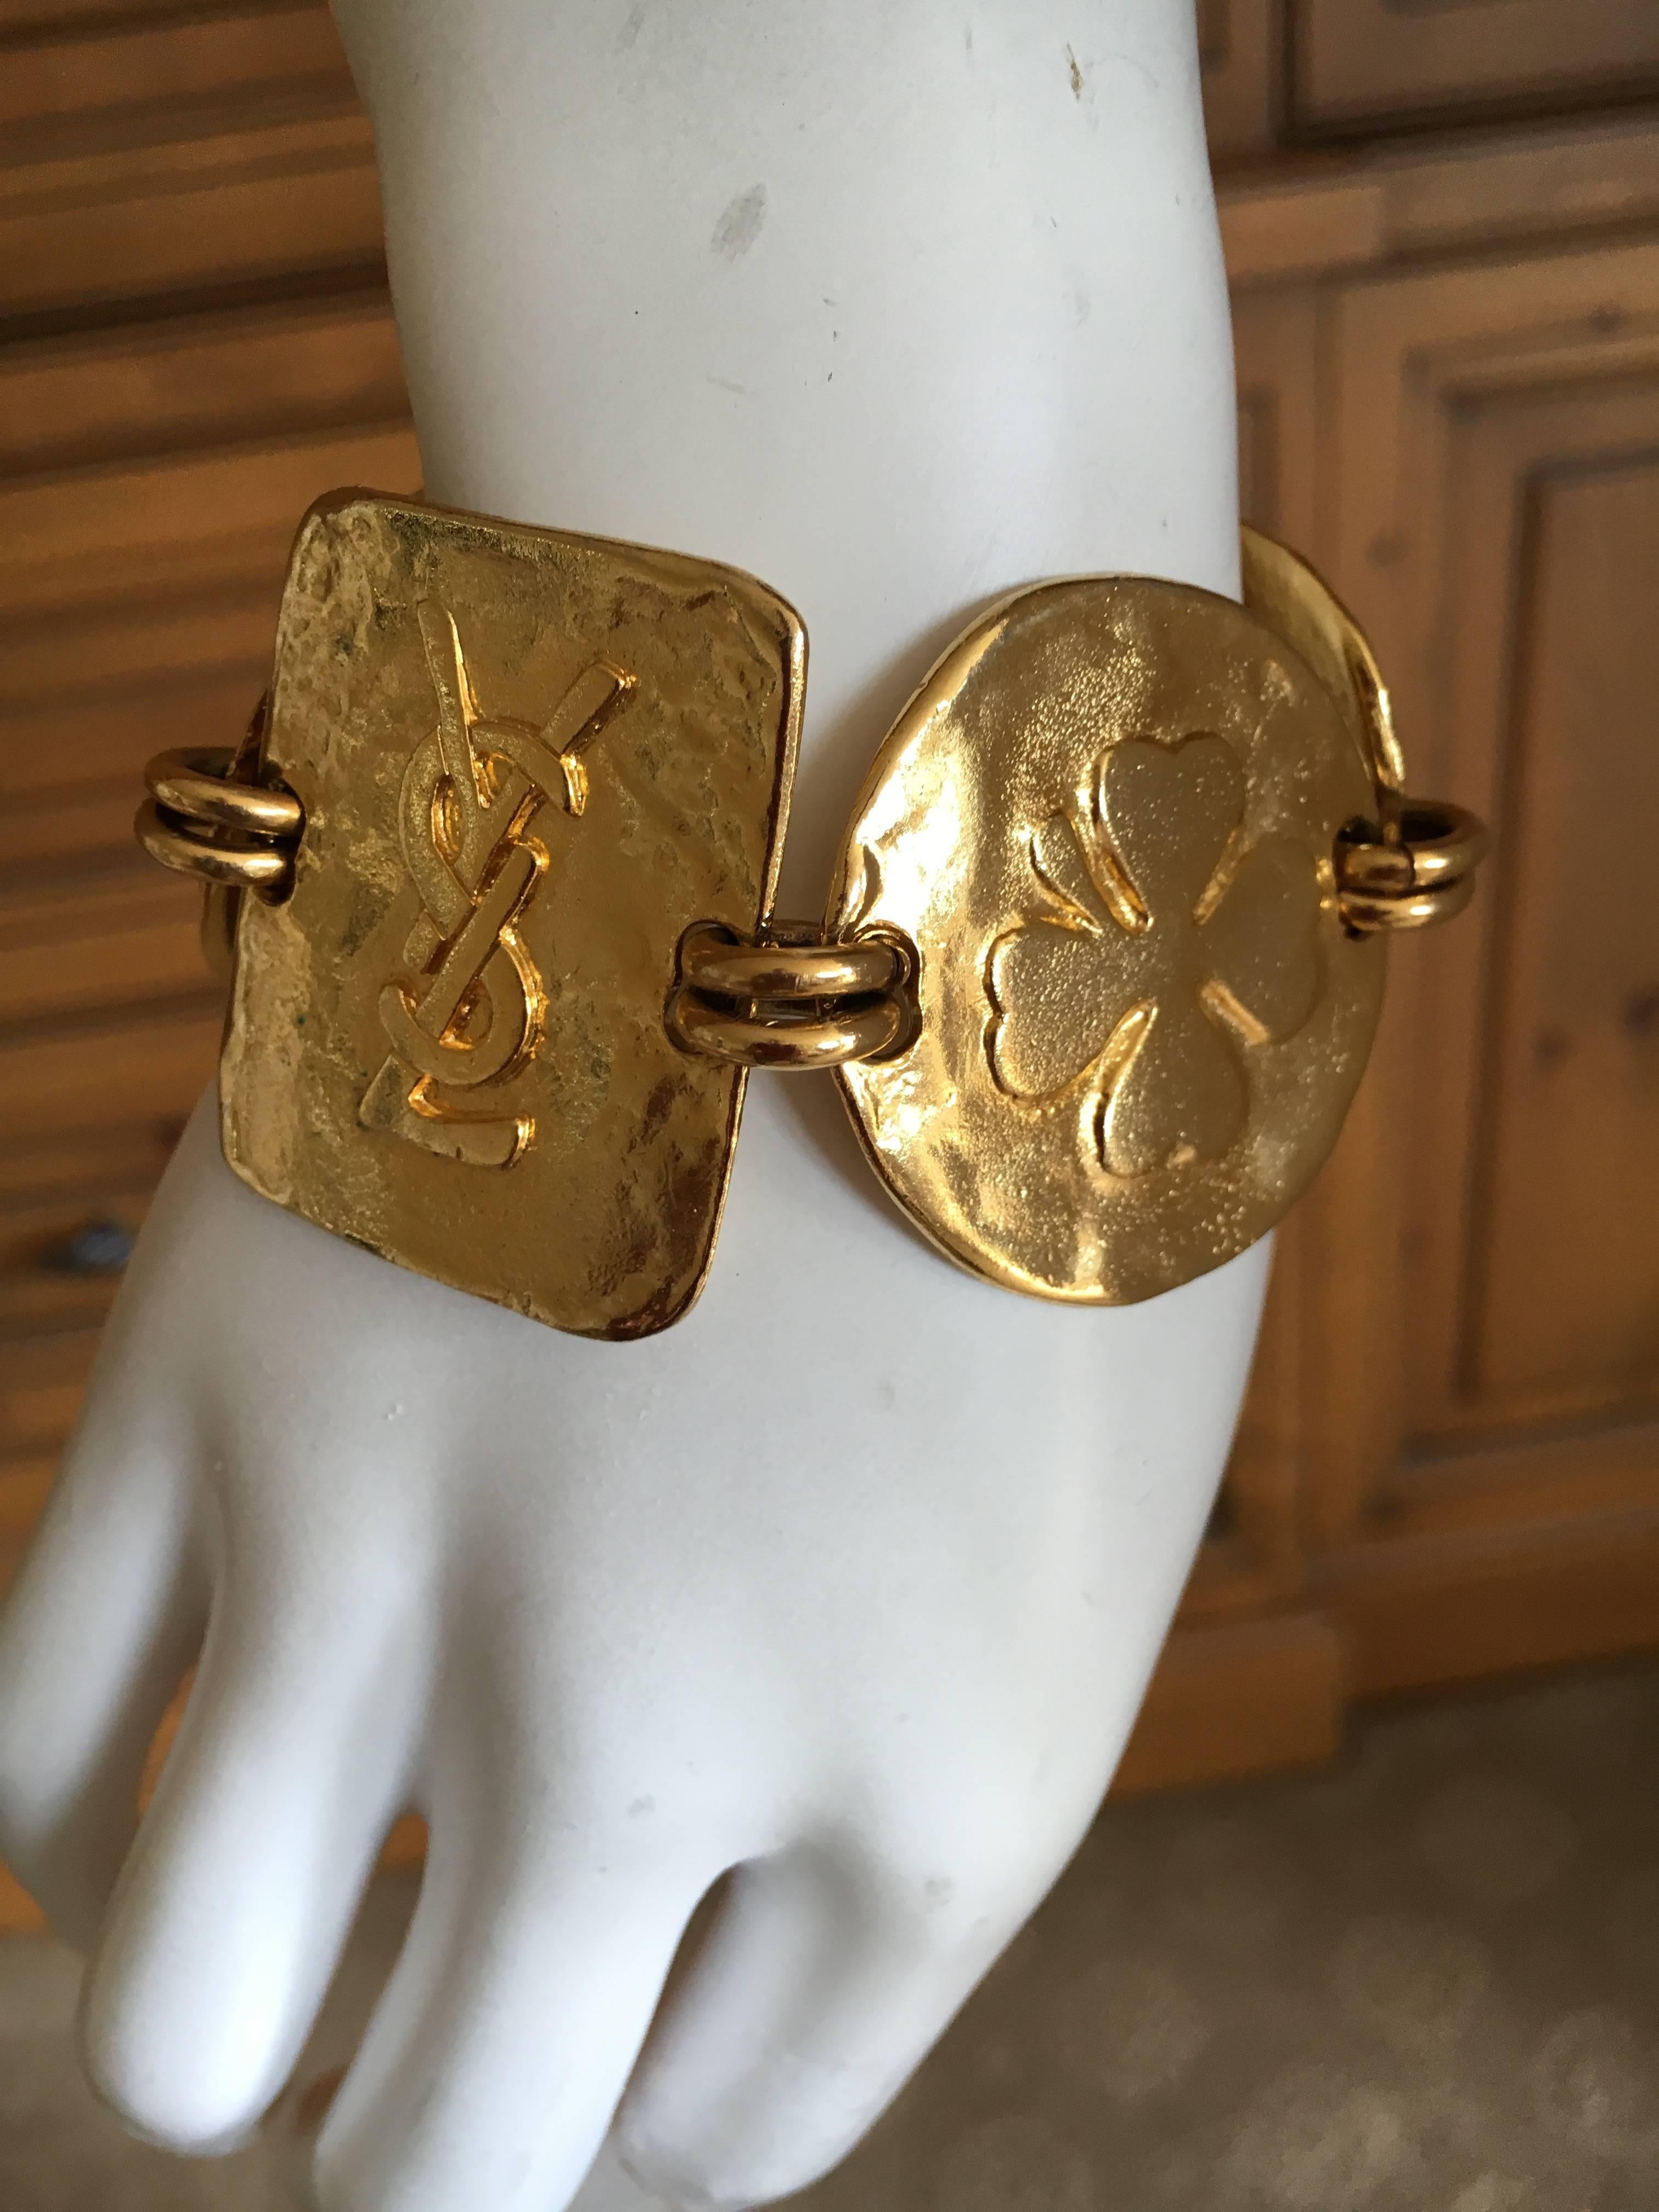 Yves Saint Laurent Rive Gauche 1970's Lucky Charm Bracelet In Excellent Condition For Sale In Cloverdale, CA